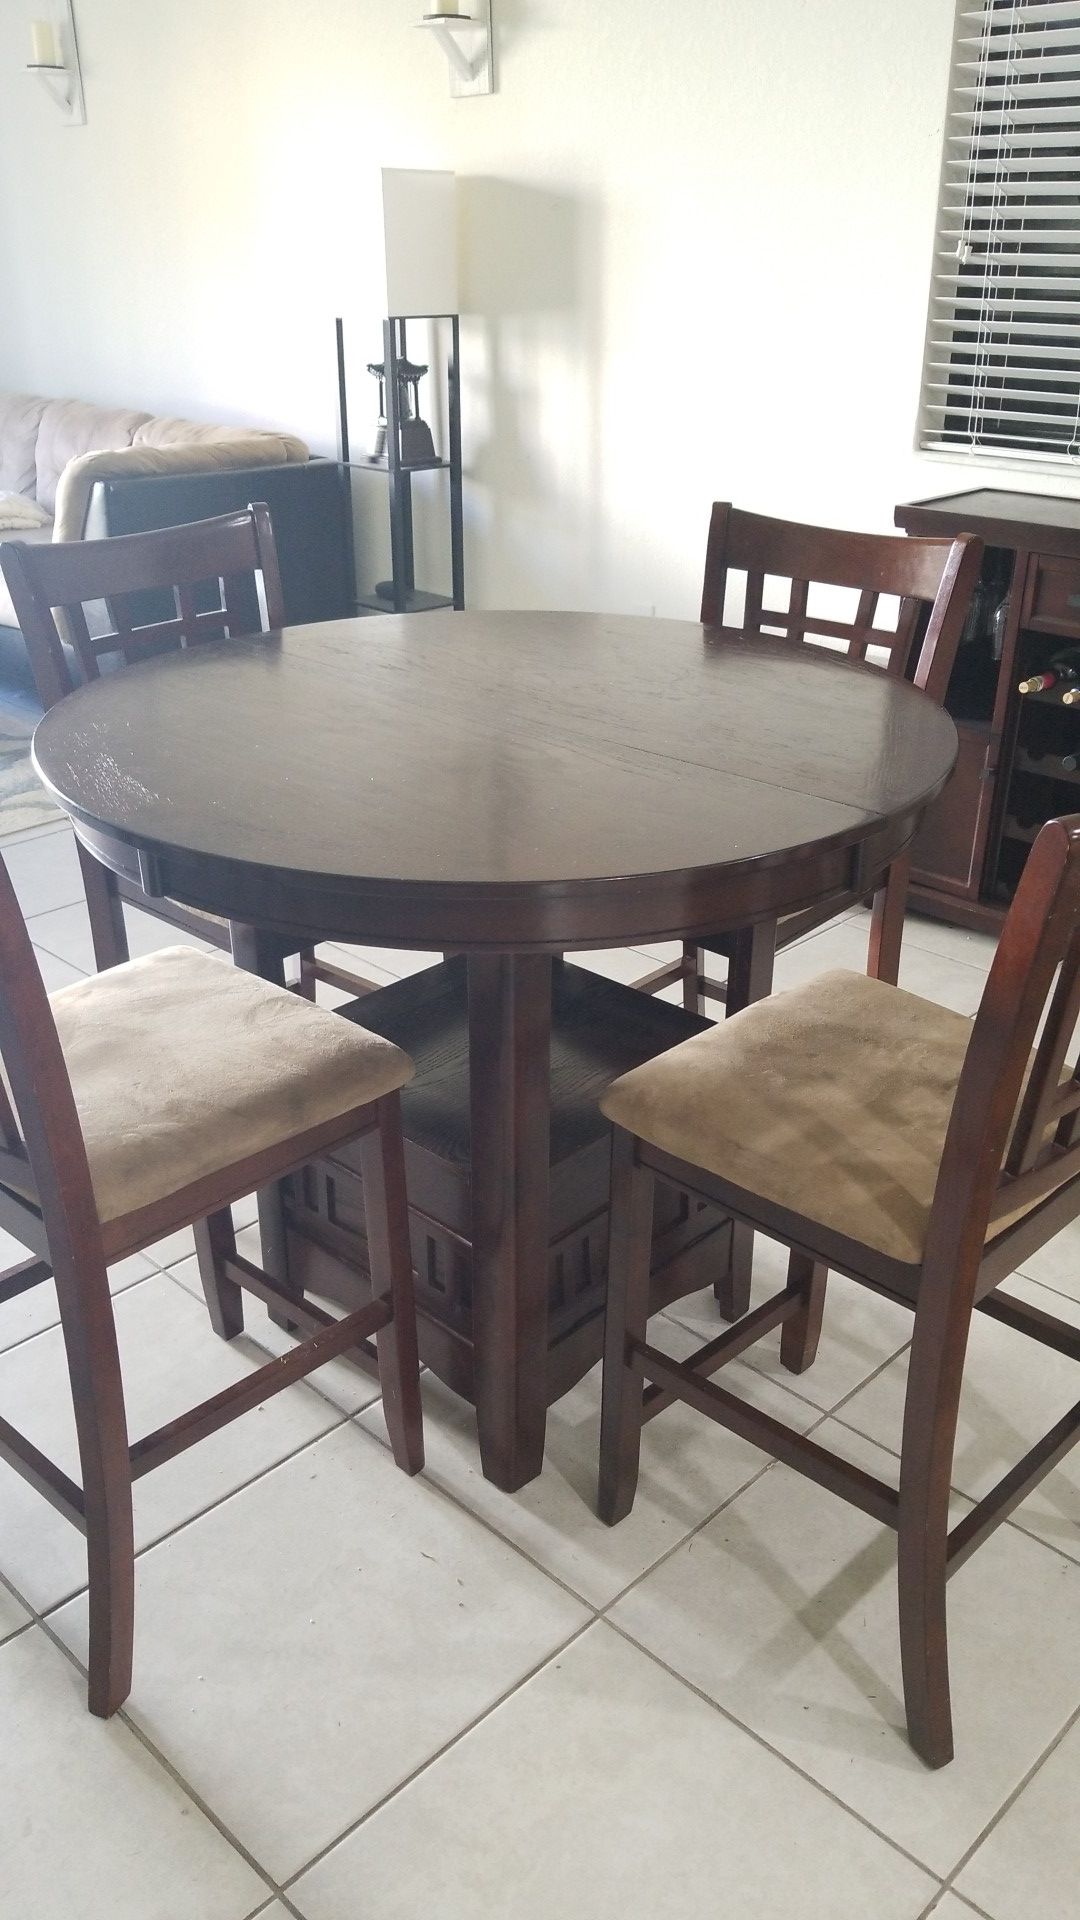 Breakfast table, with 4 chairs. Has leaf, 150$